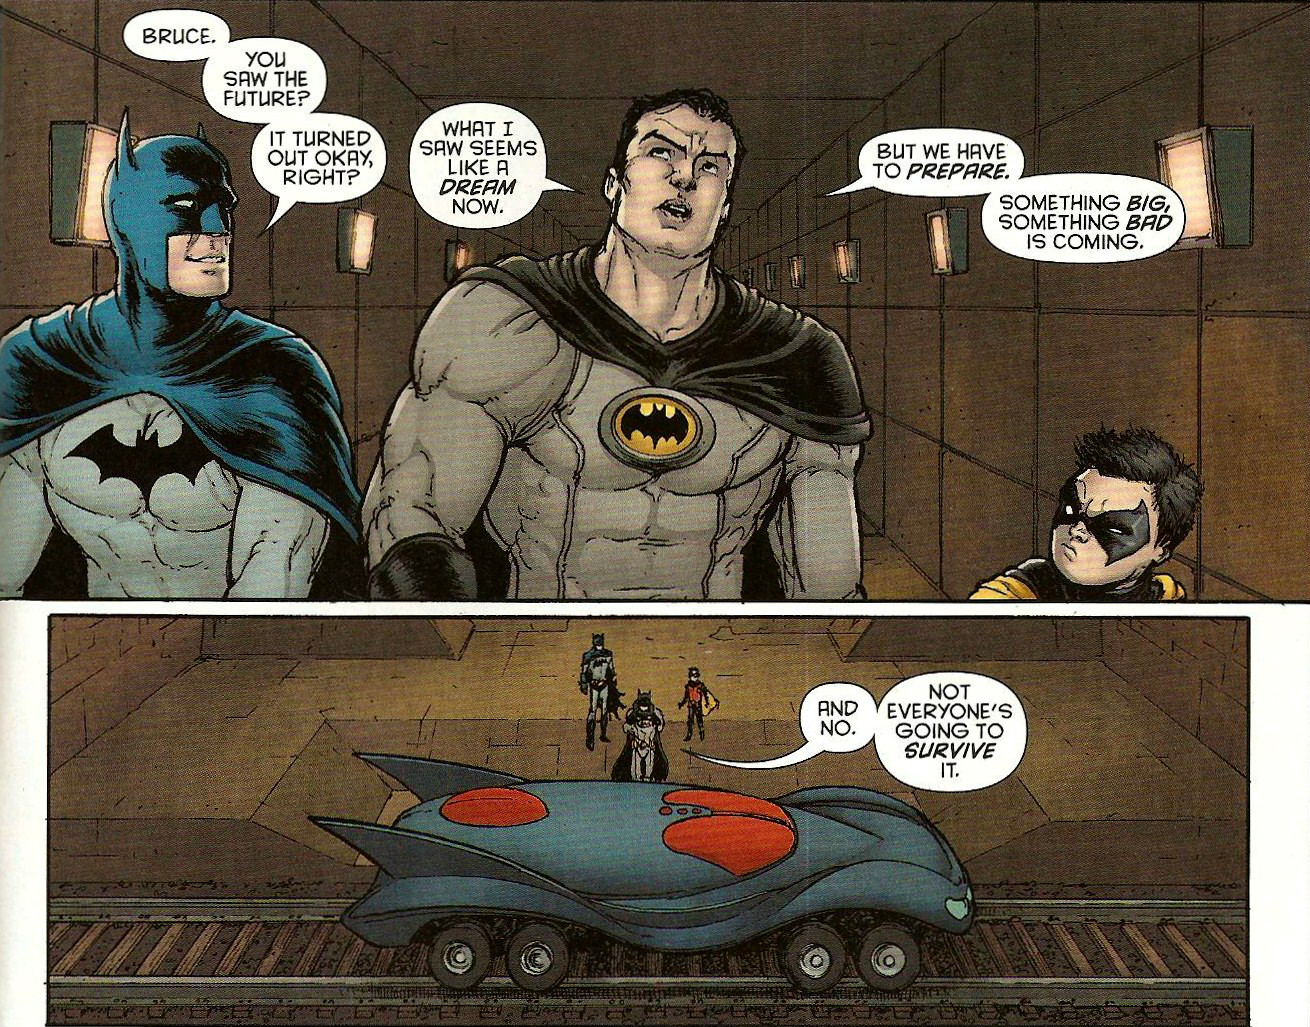 From Batman Incorporated (Vol. 1) #6 (2011)